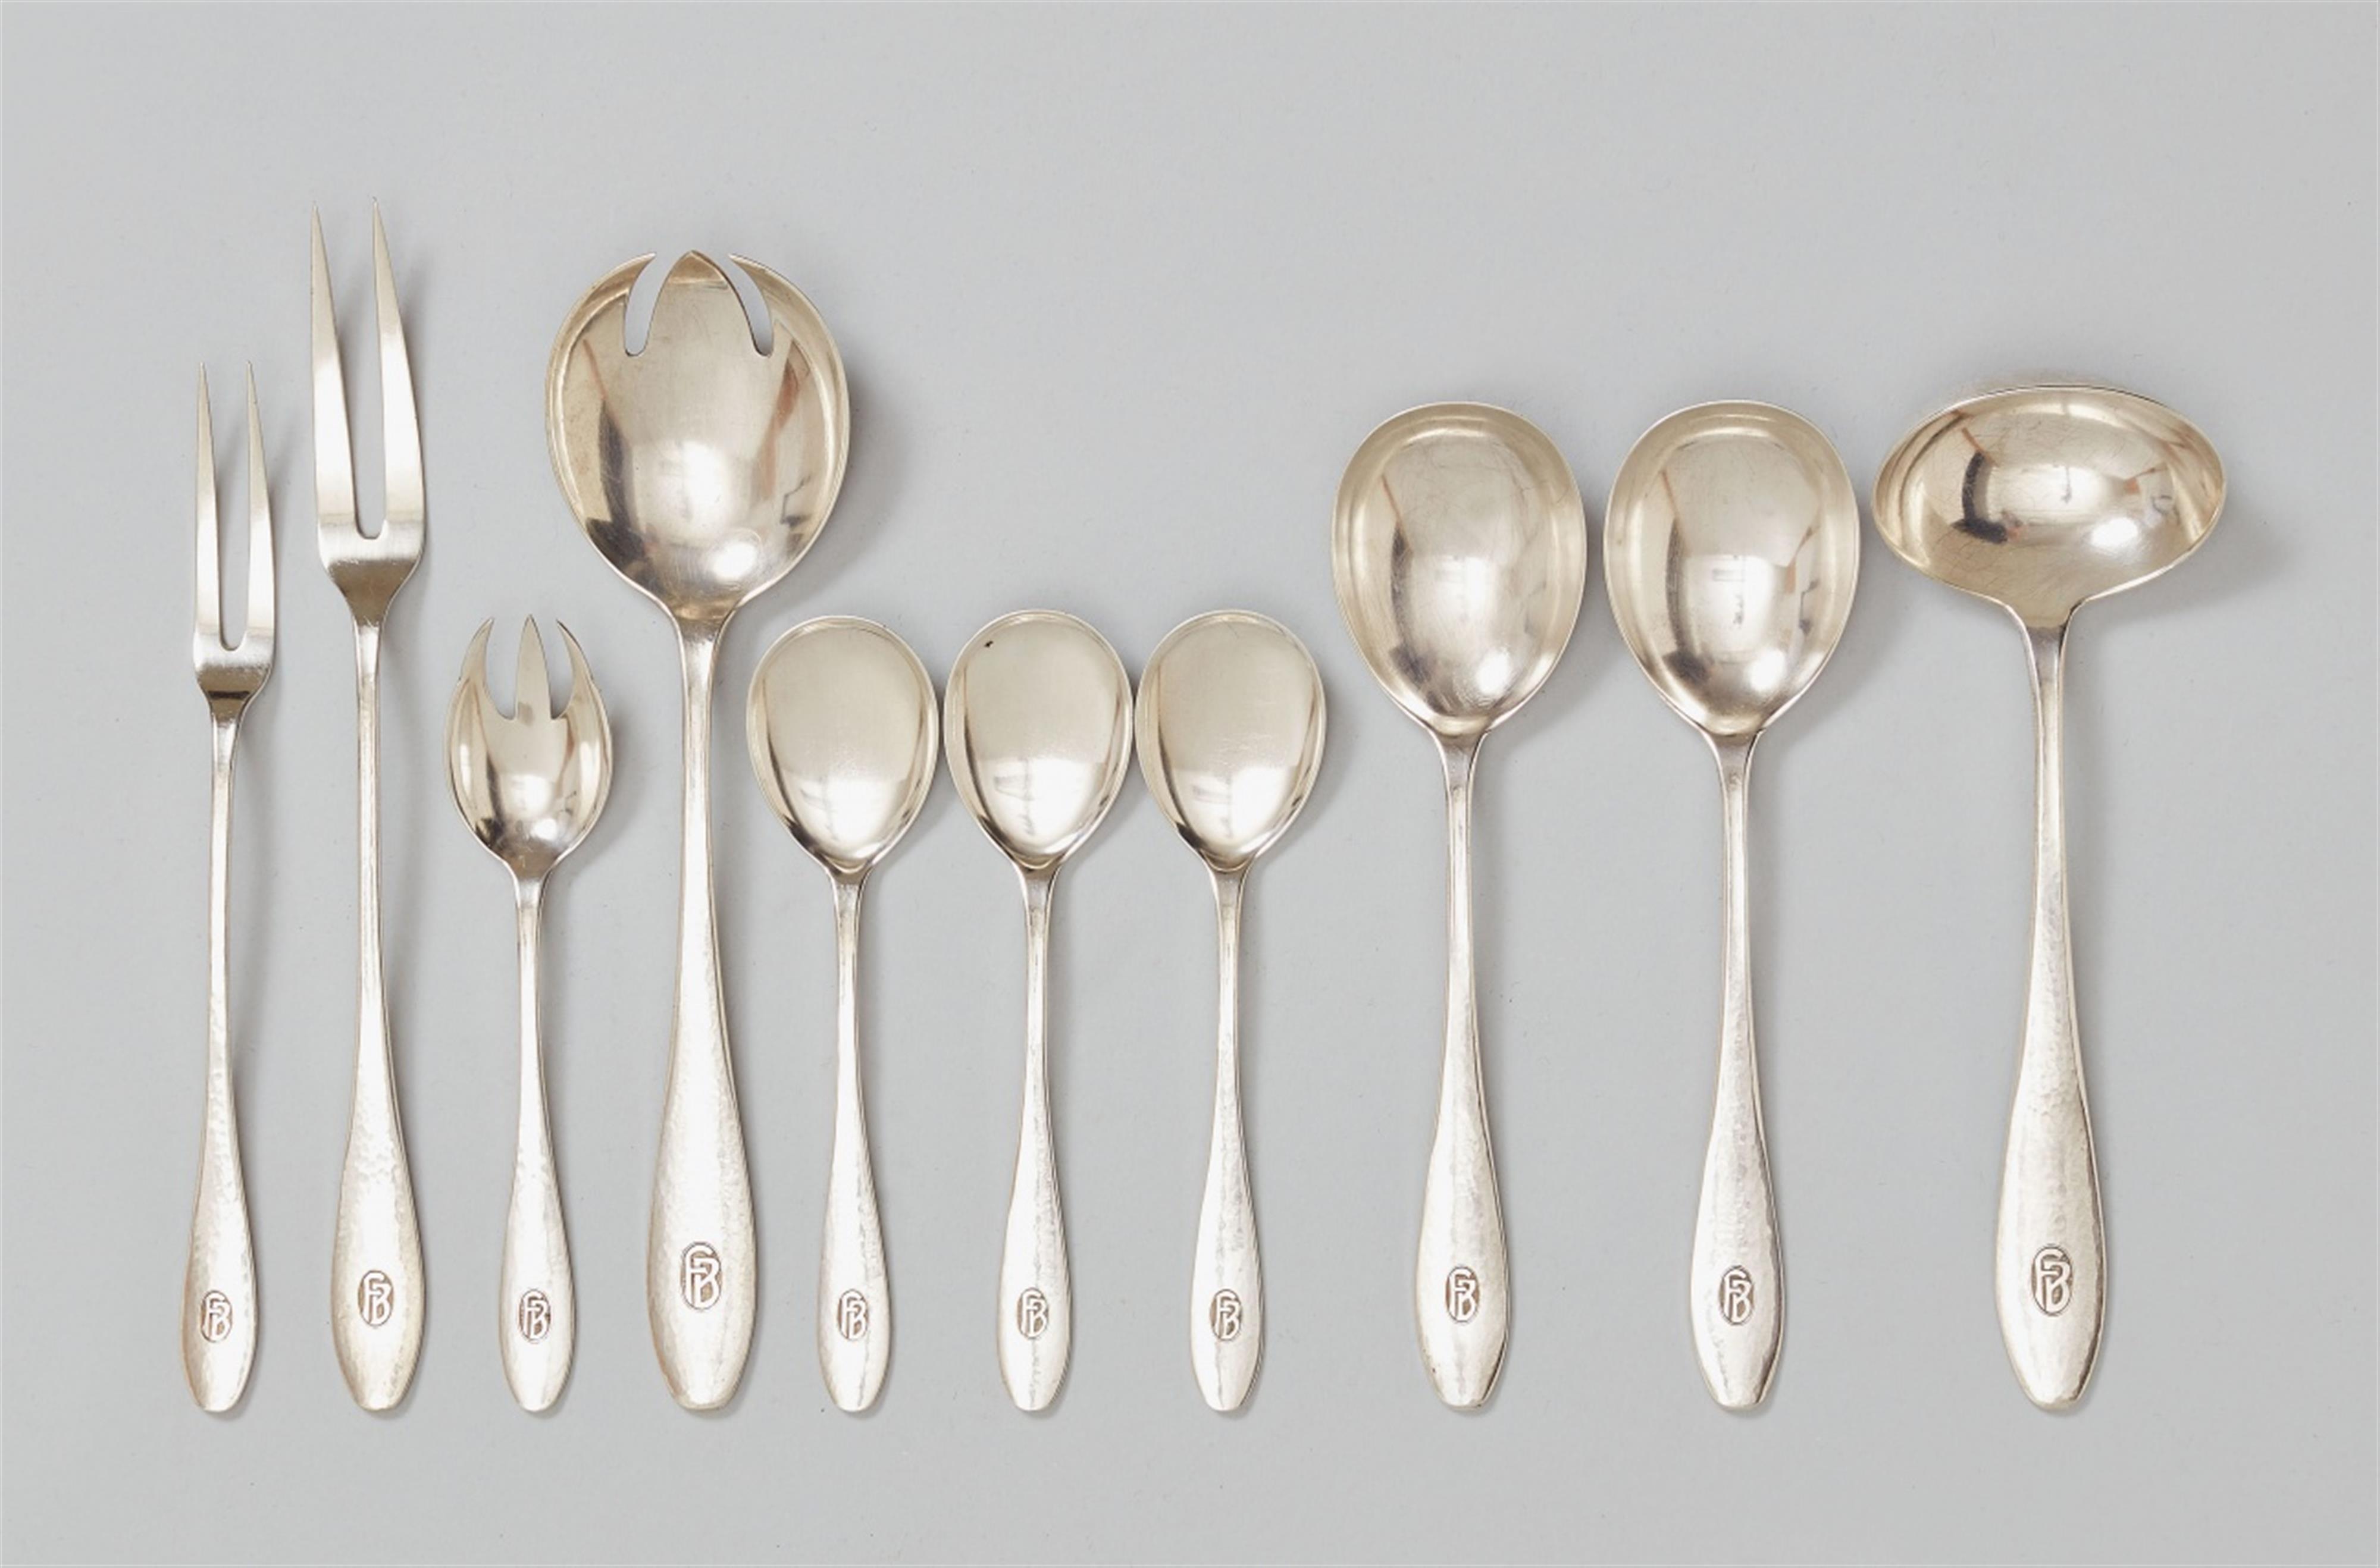 Ten jugendstil Munich silver serving pieces. Comprising five spoons, four forks and a small ladle, all pieces monogrammed "FB". Design attributed to Richard Riemerschmid 1911/12, produced by Carl Weishaupt. - 